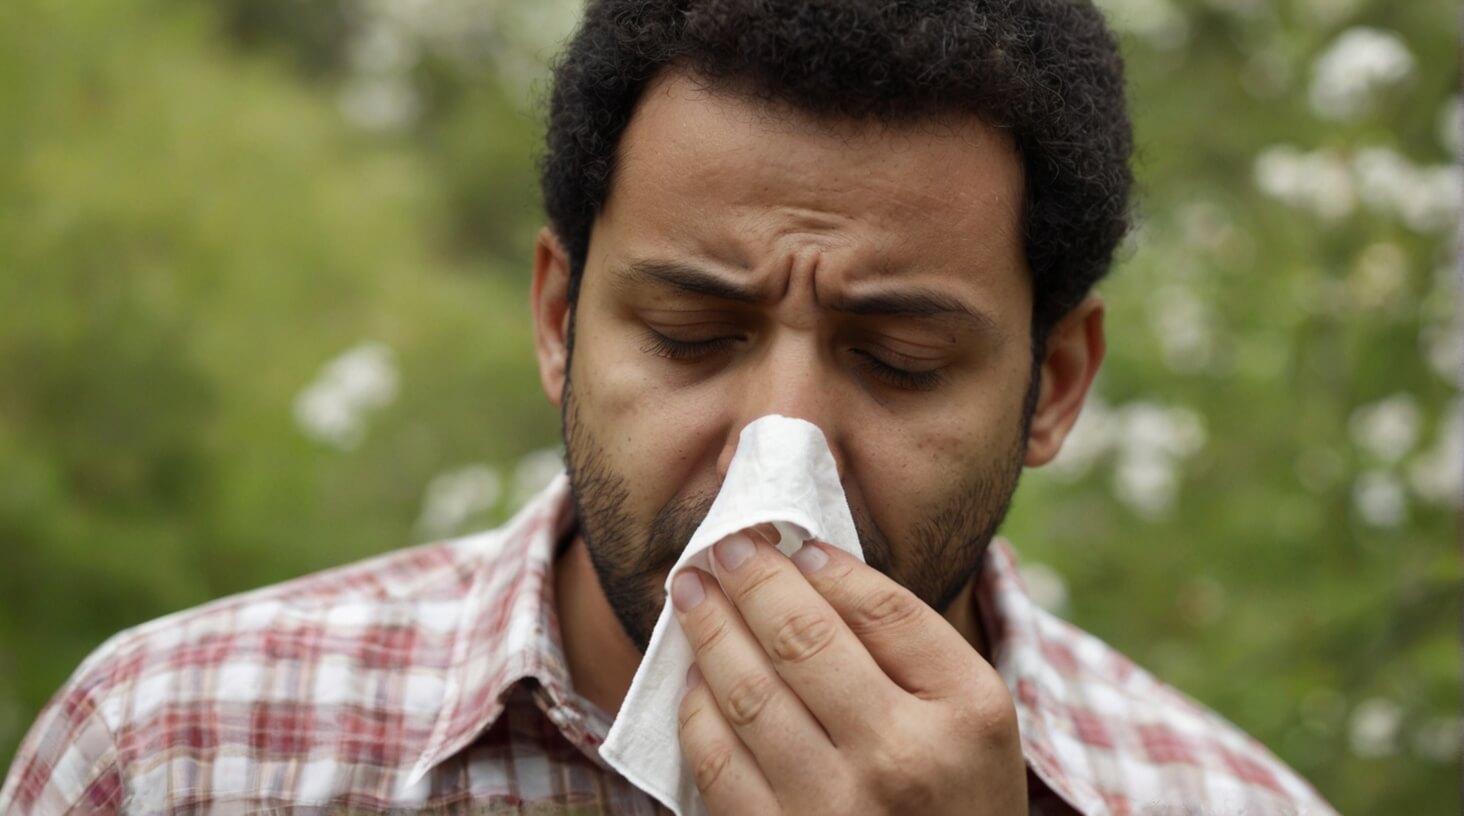 Image depicting a checklist with common allergy symptoms: runny nose, sneezing, itching, and watery eyes.